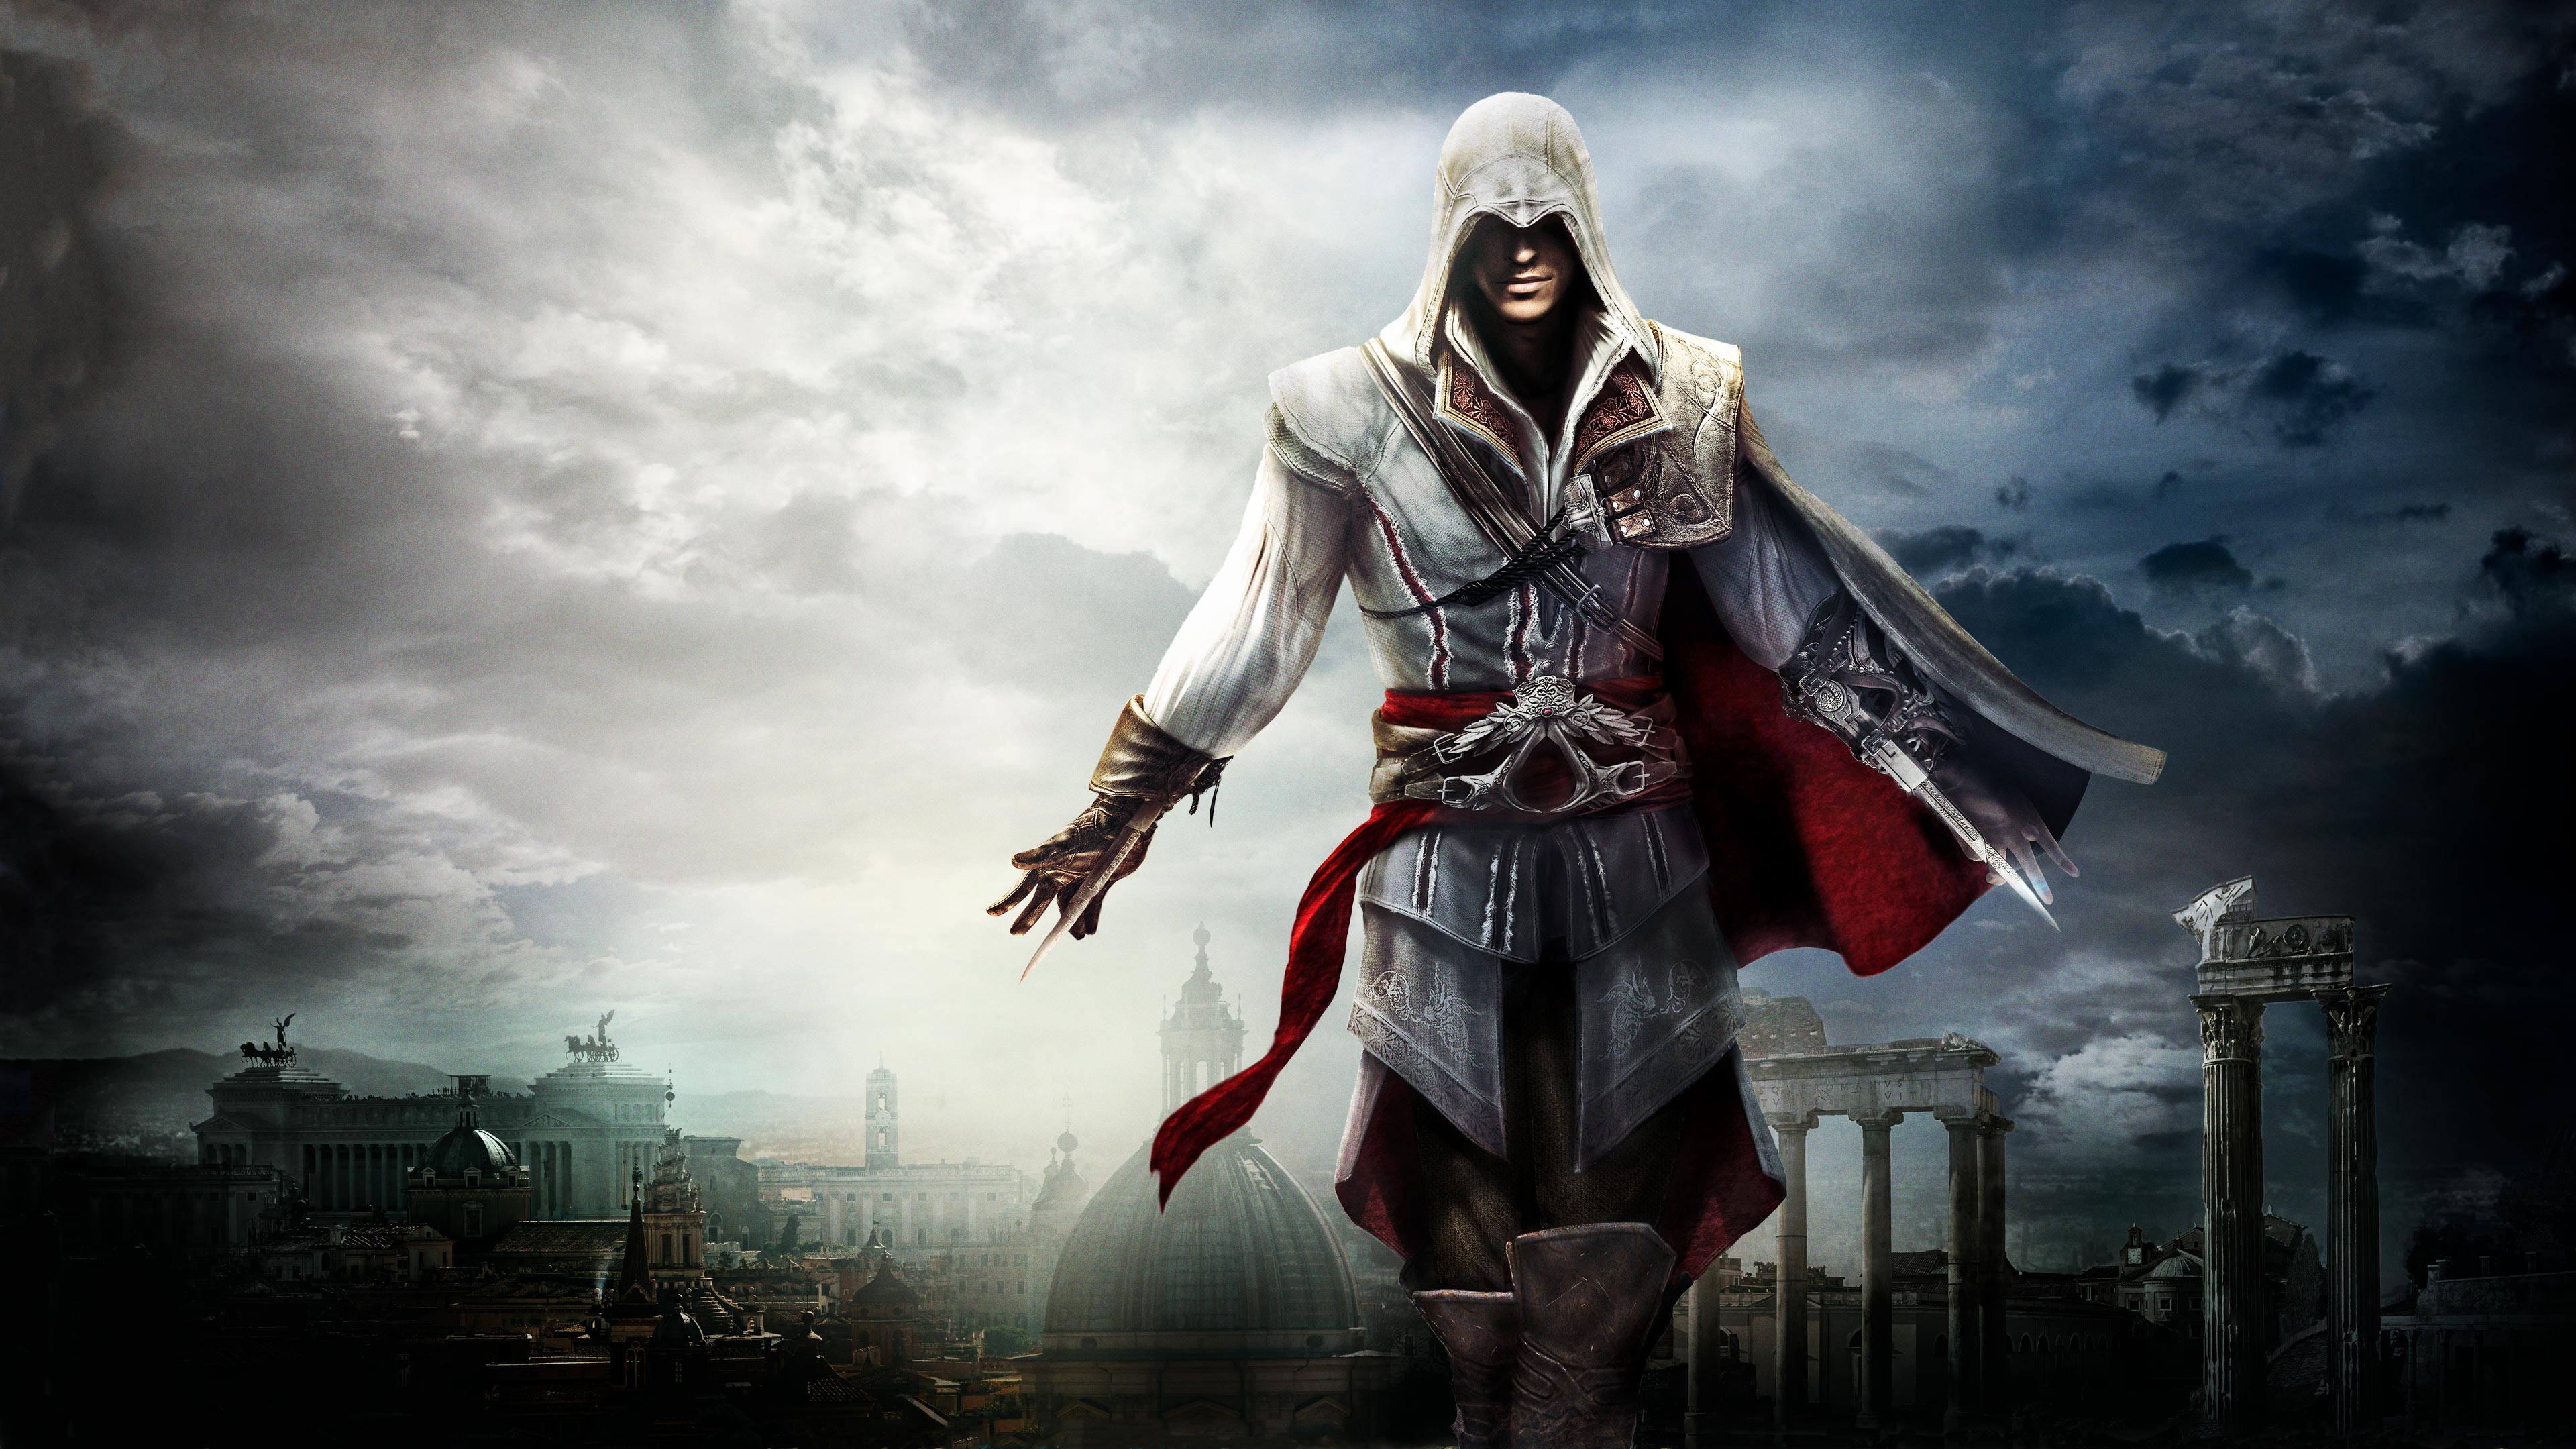 Assassin's Creed The Ezio Collection (Simplified Chinese, English, Korean, Traditional Chinese)